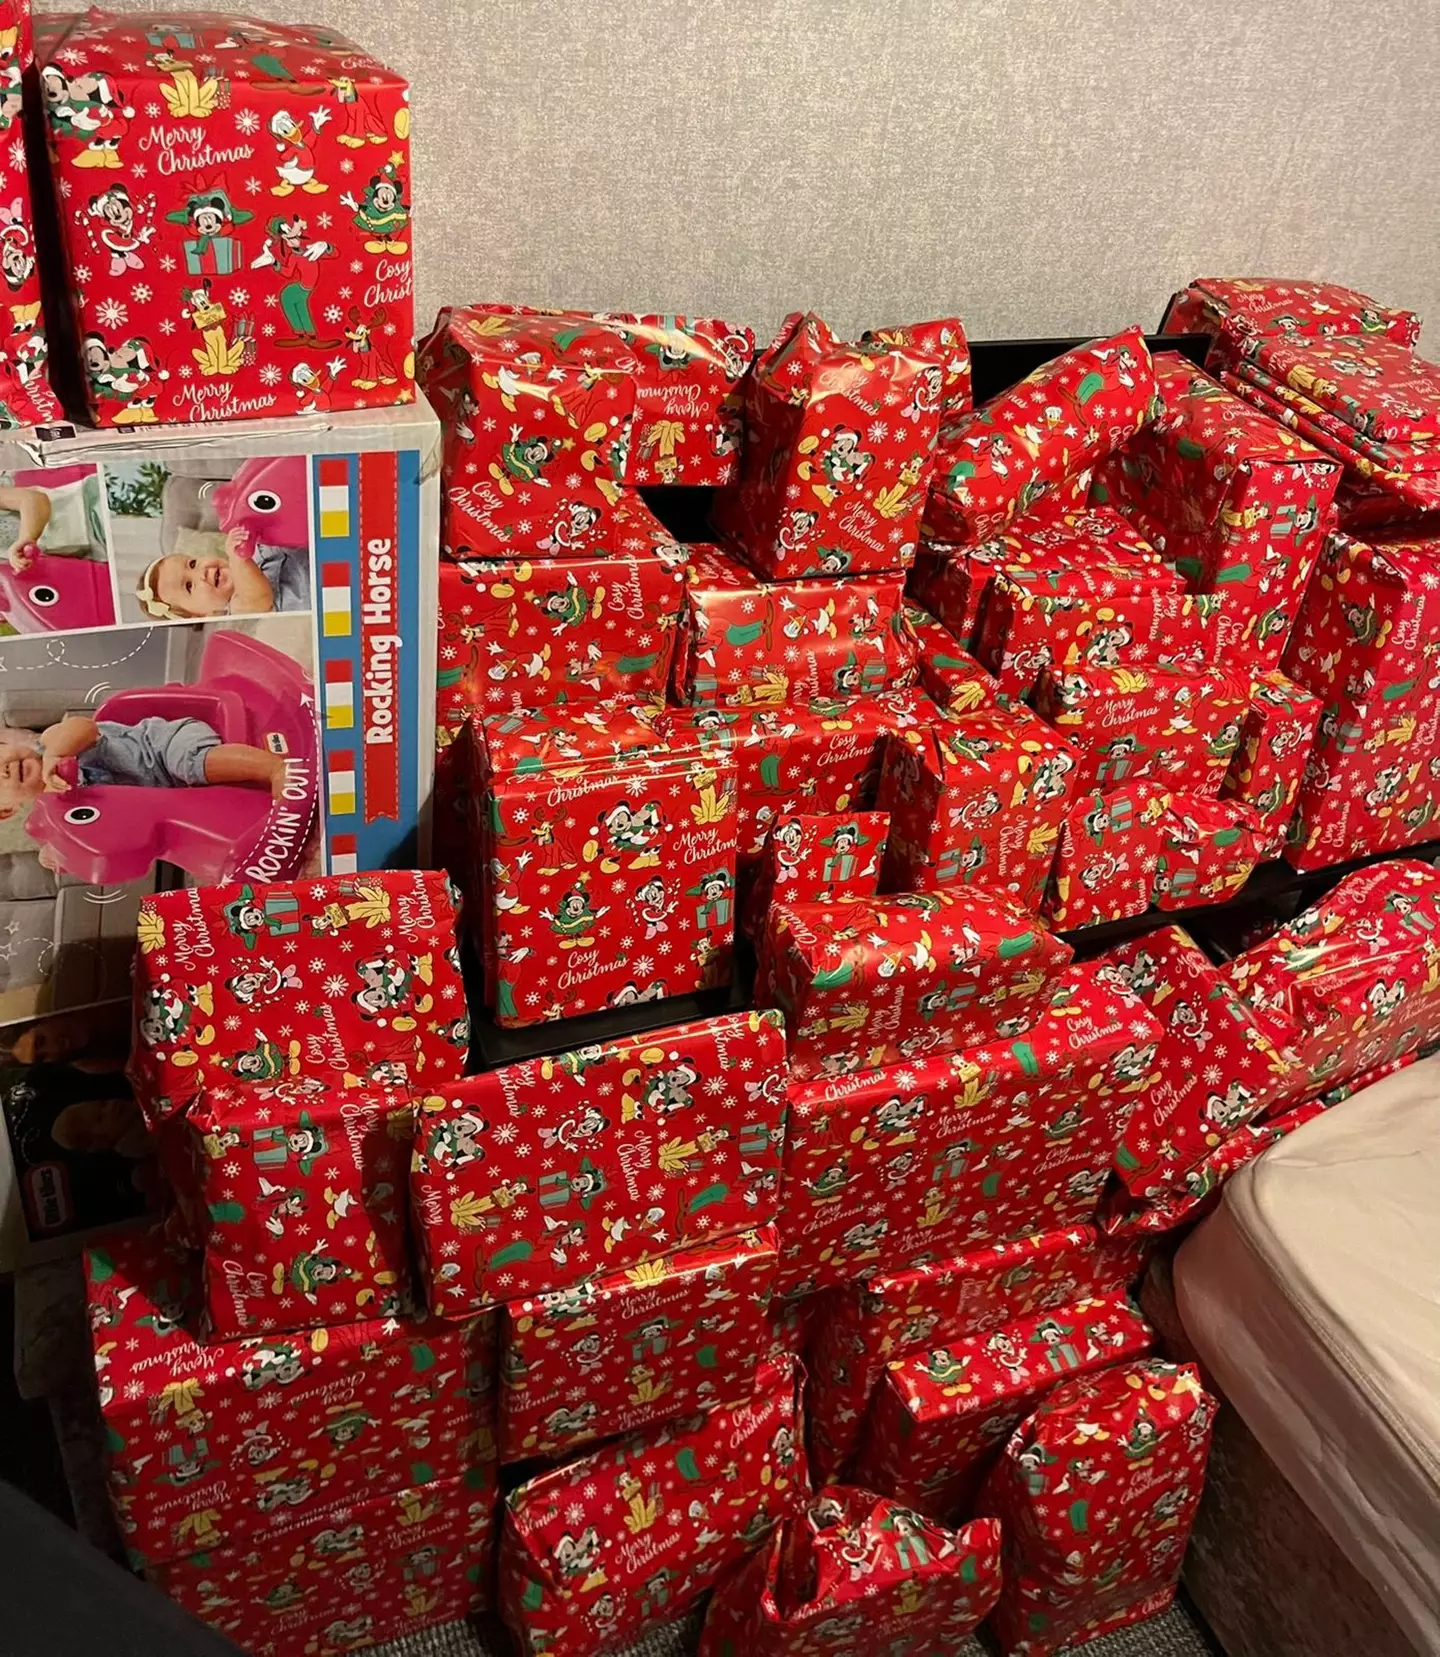 Sarah spent over £1,000 on presents for Alaya.